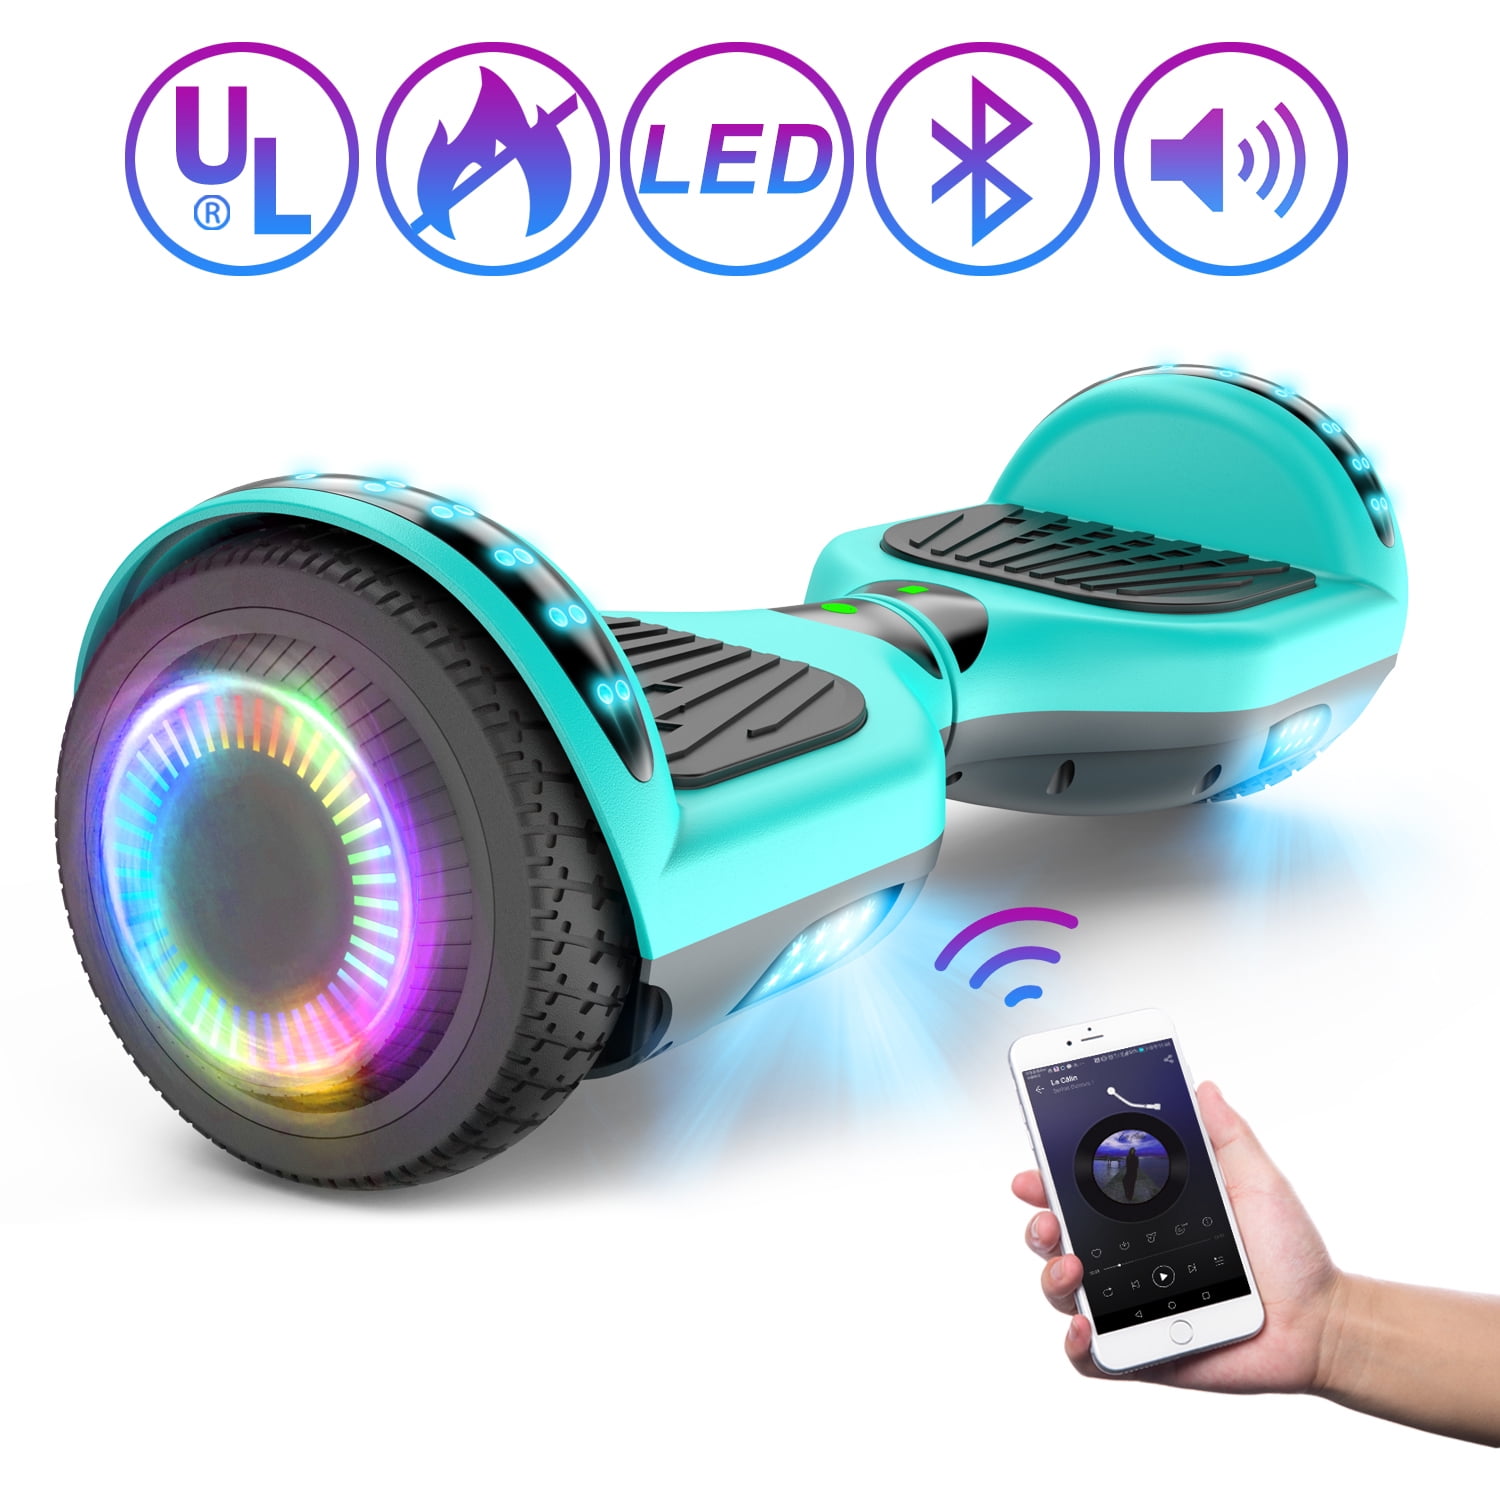 Hoverboard 6.5" Bluetooth Electric Scooters LED Self-Balancing Scooter+Key+Bag 